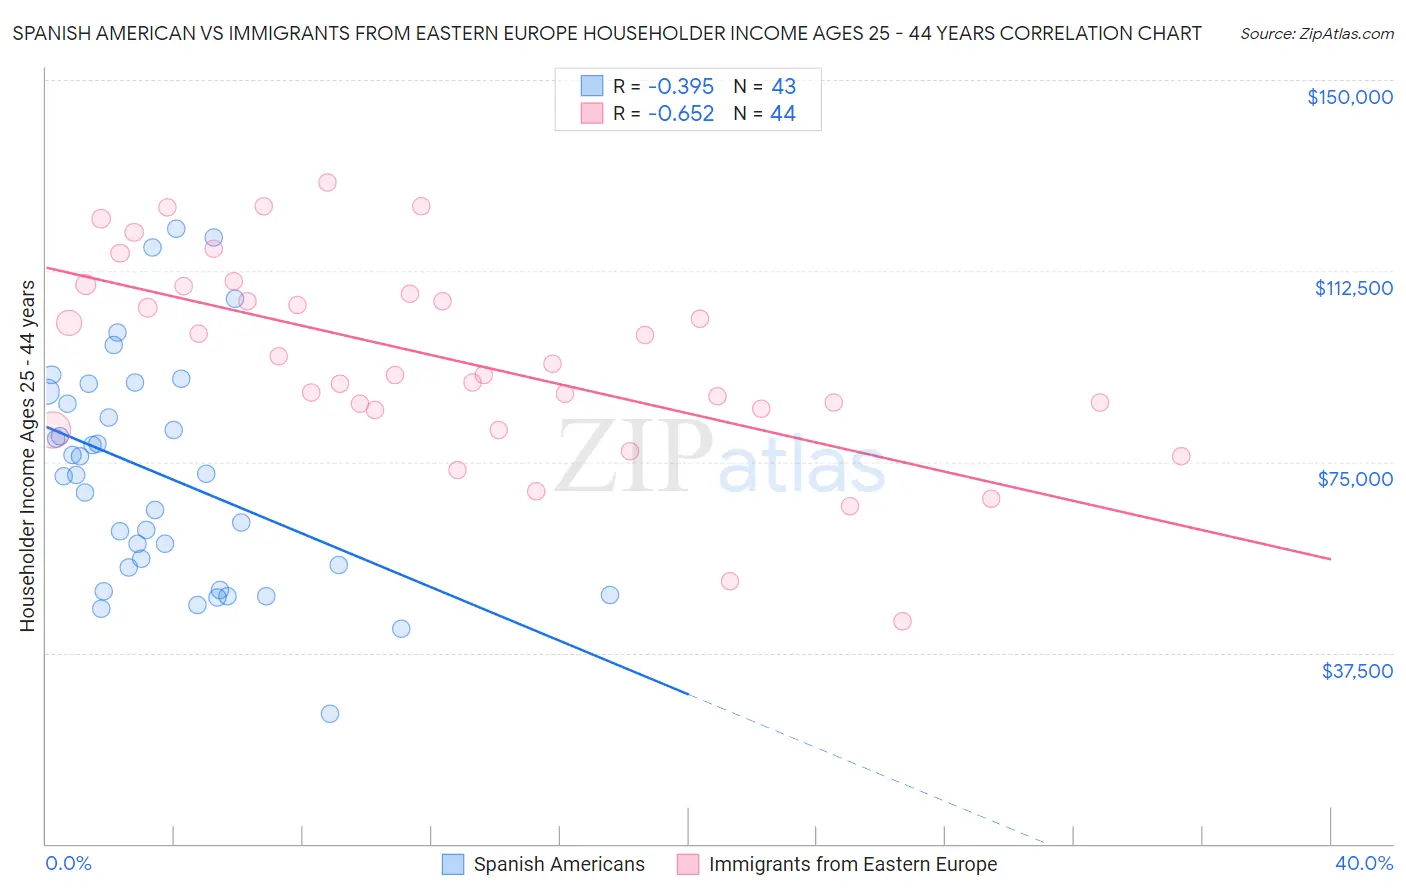 Spanish American vs Immigrants from Eastern Europe Householder Income Ages 25 - 44 years